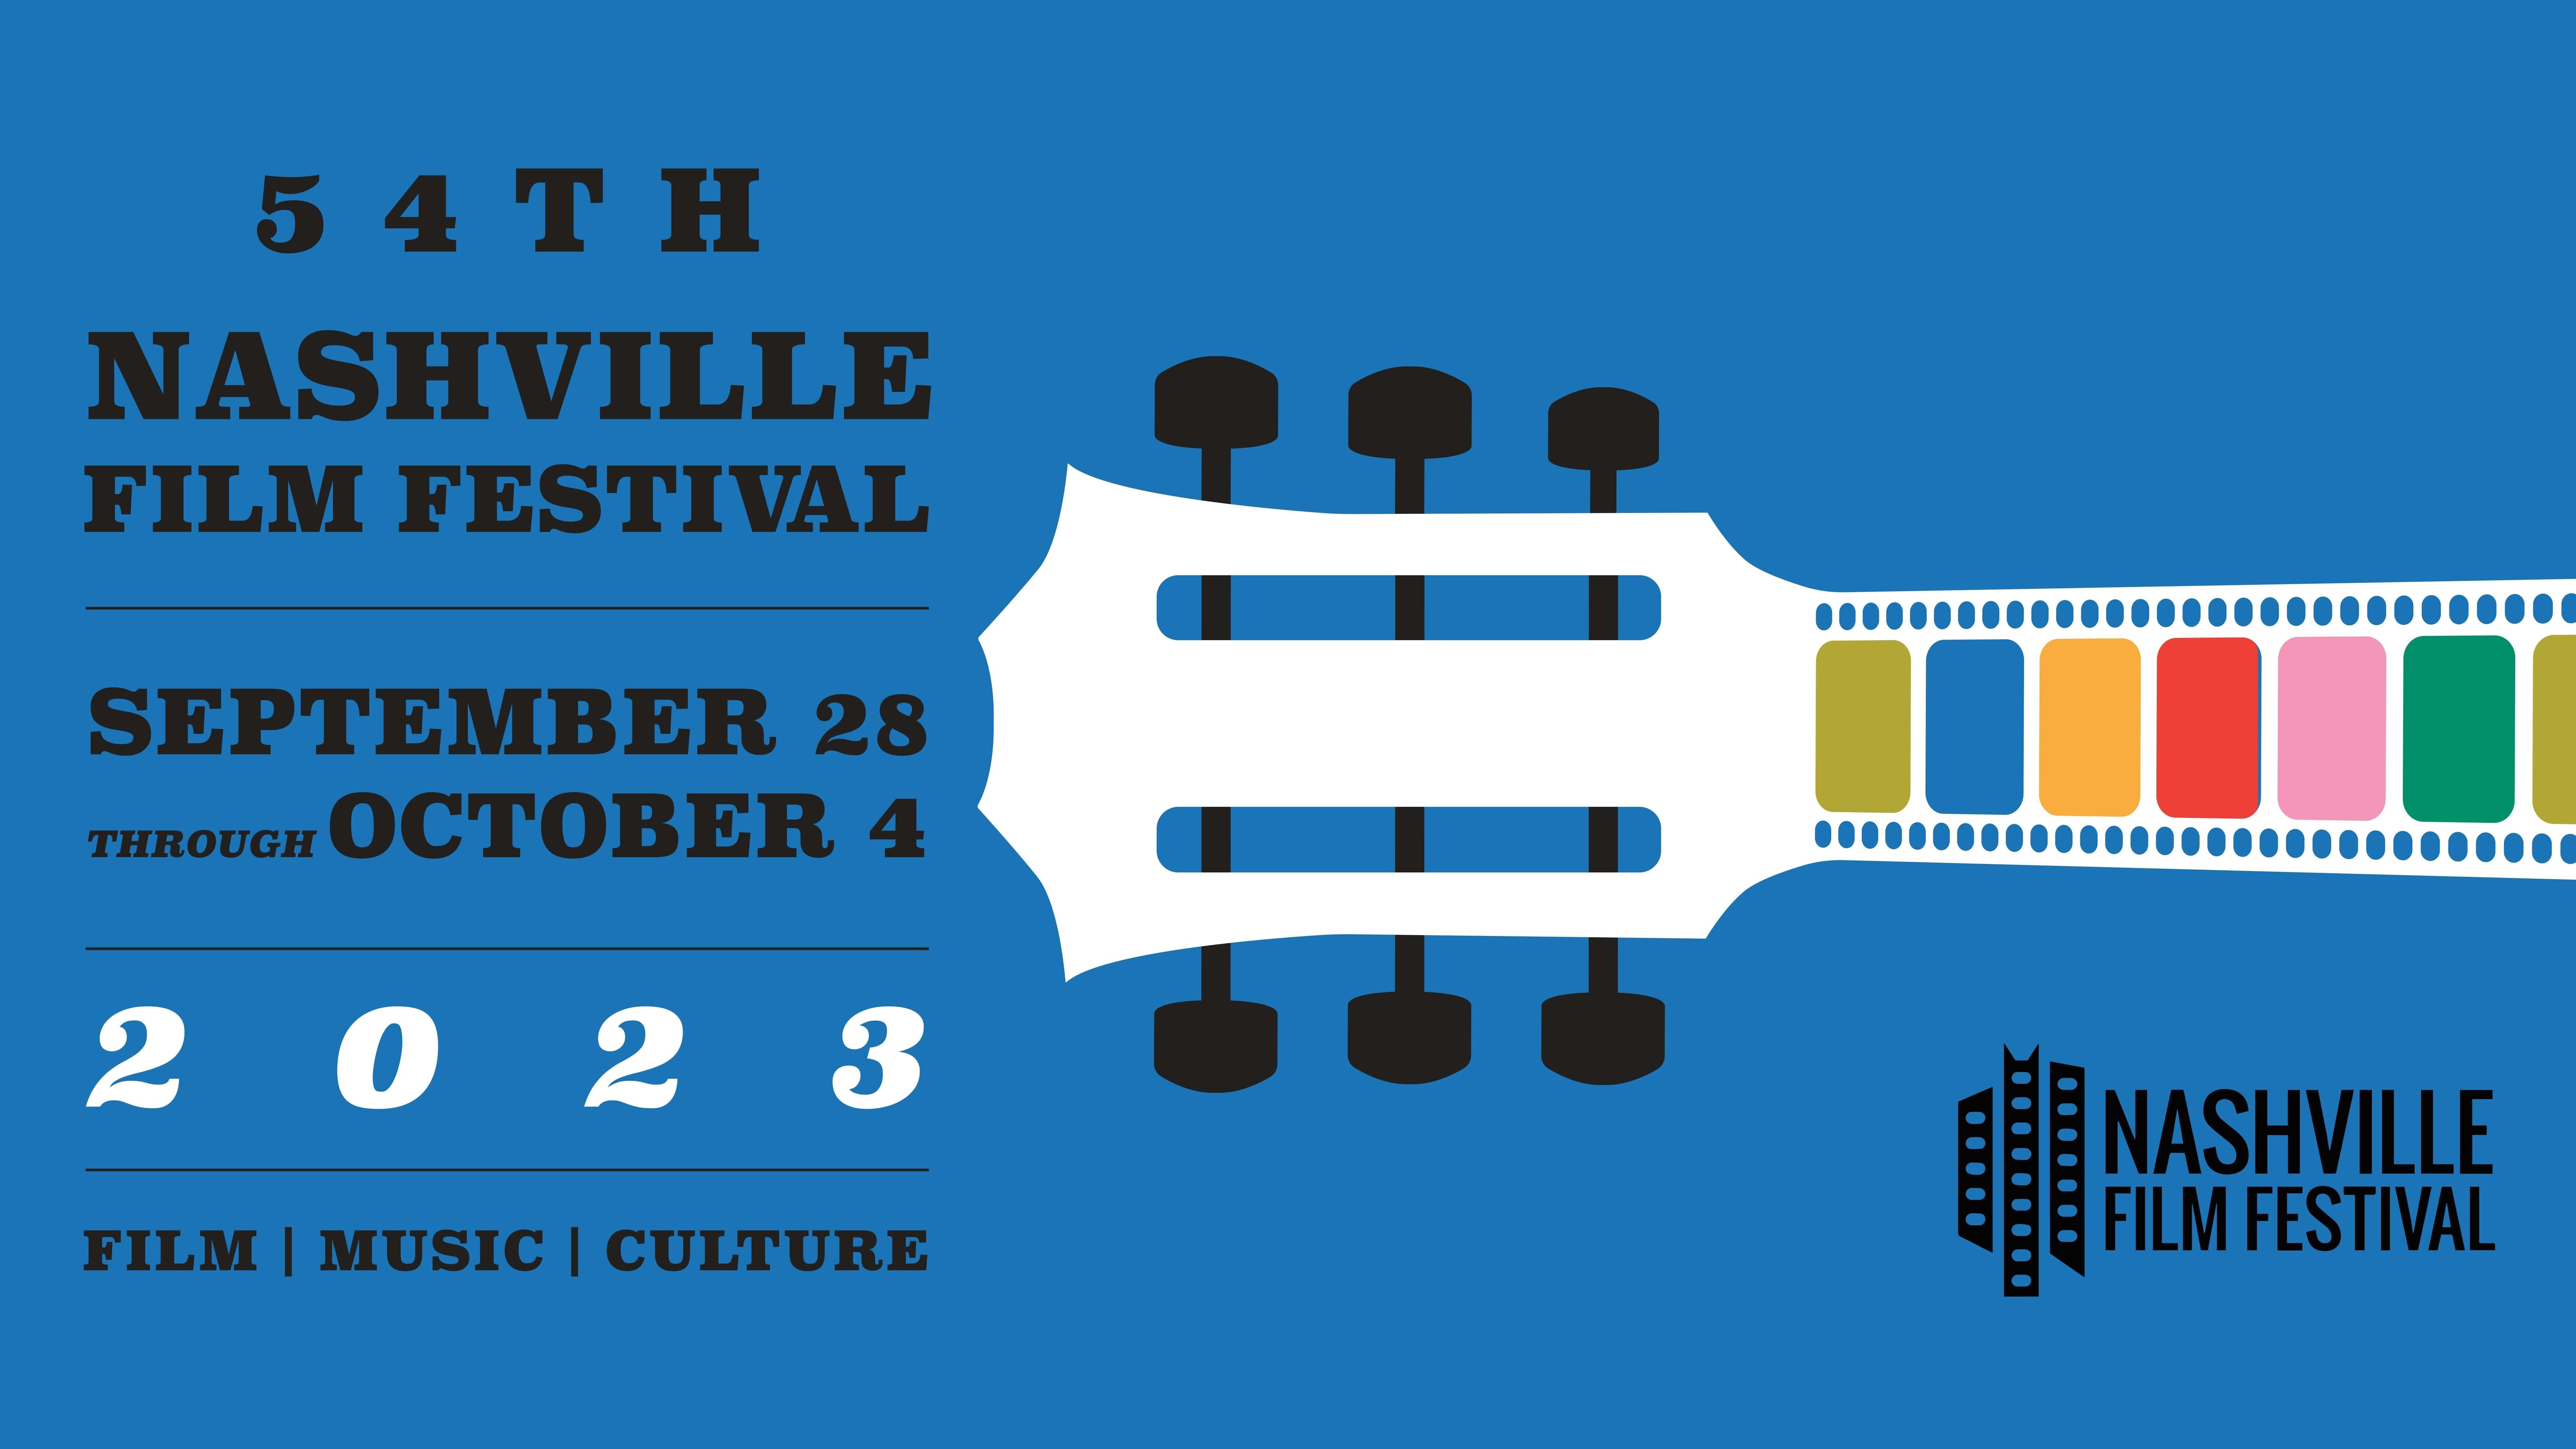 Come See Randy speak on the SCL panel Saturday at the Nashville Film Festival!